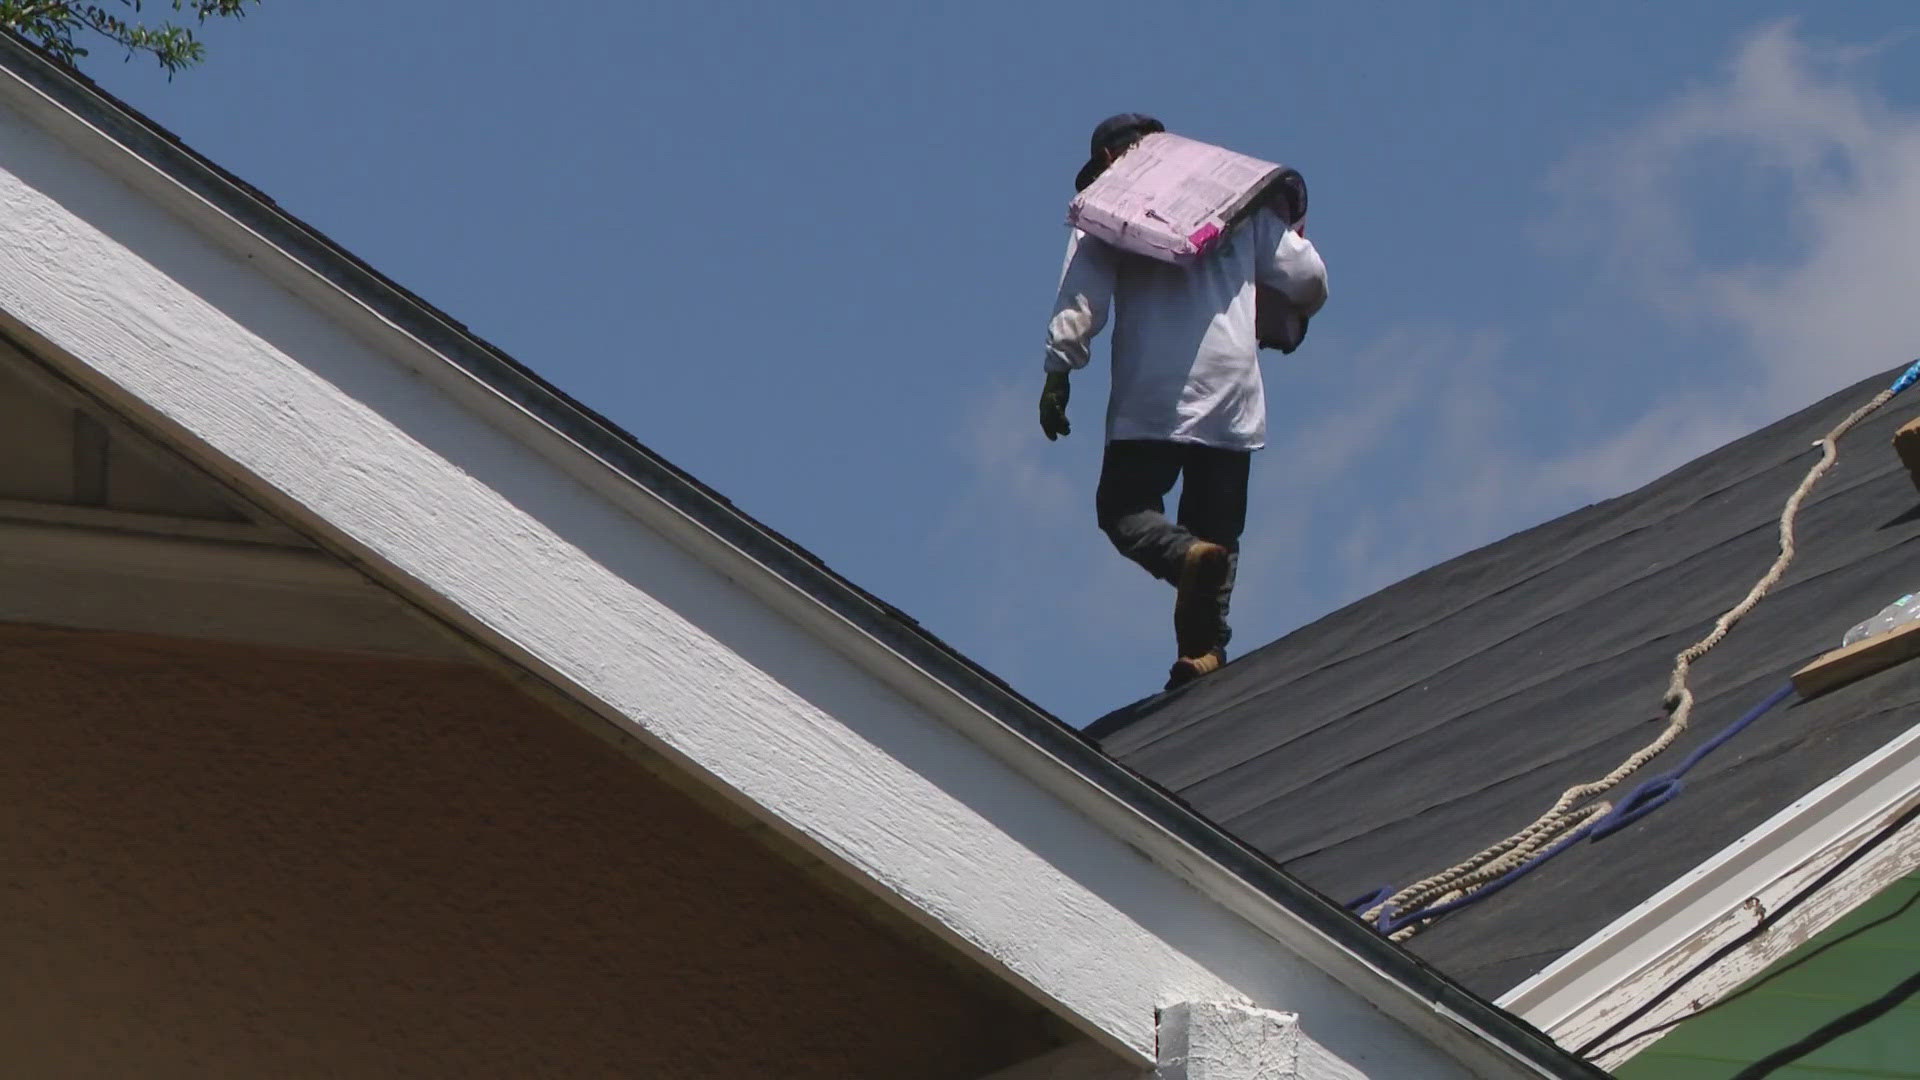 WWL Louisiana's Brandon Walker explains the state bill behind fortifying roofs in Louisiana and what it could mean for some homeowners.